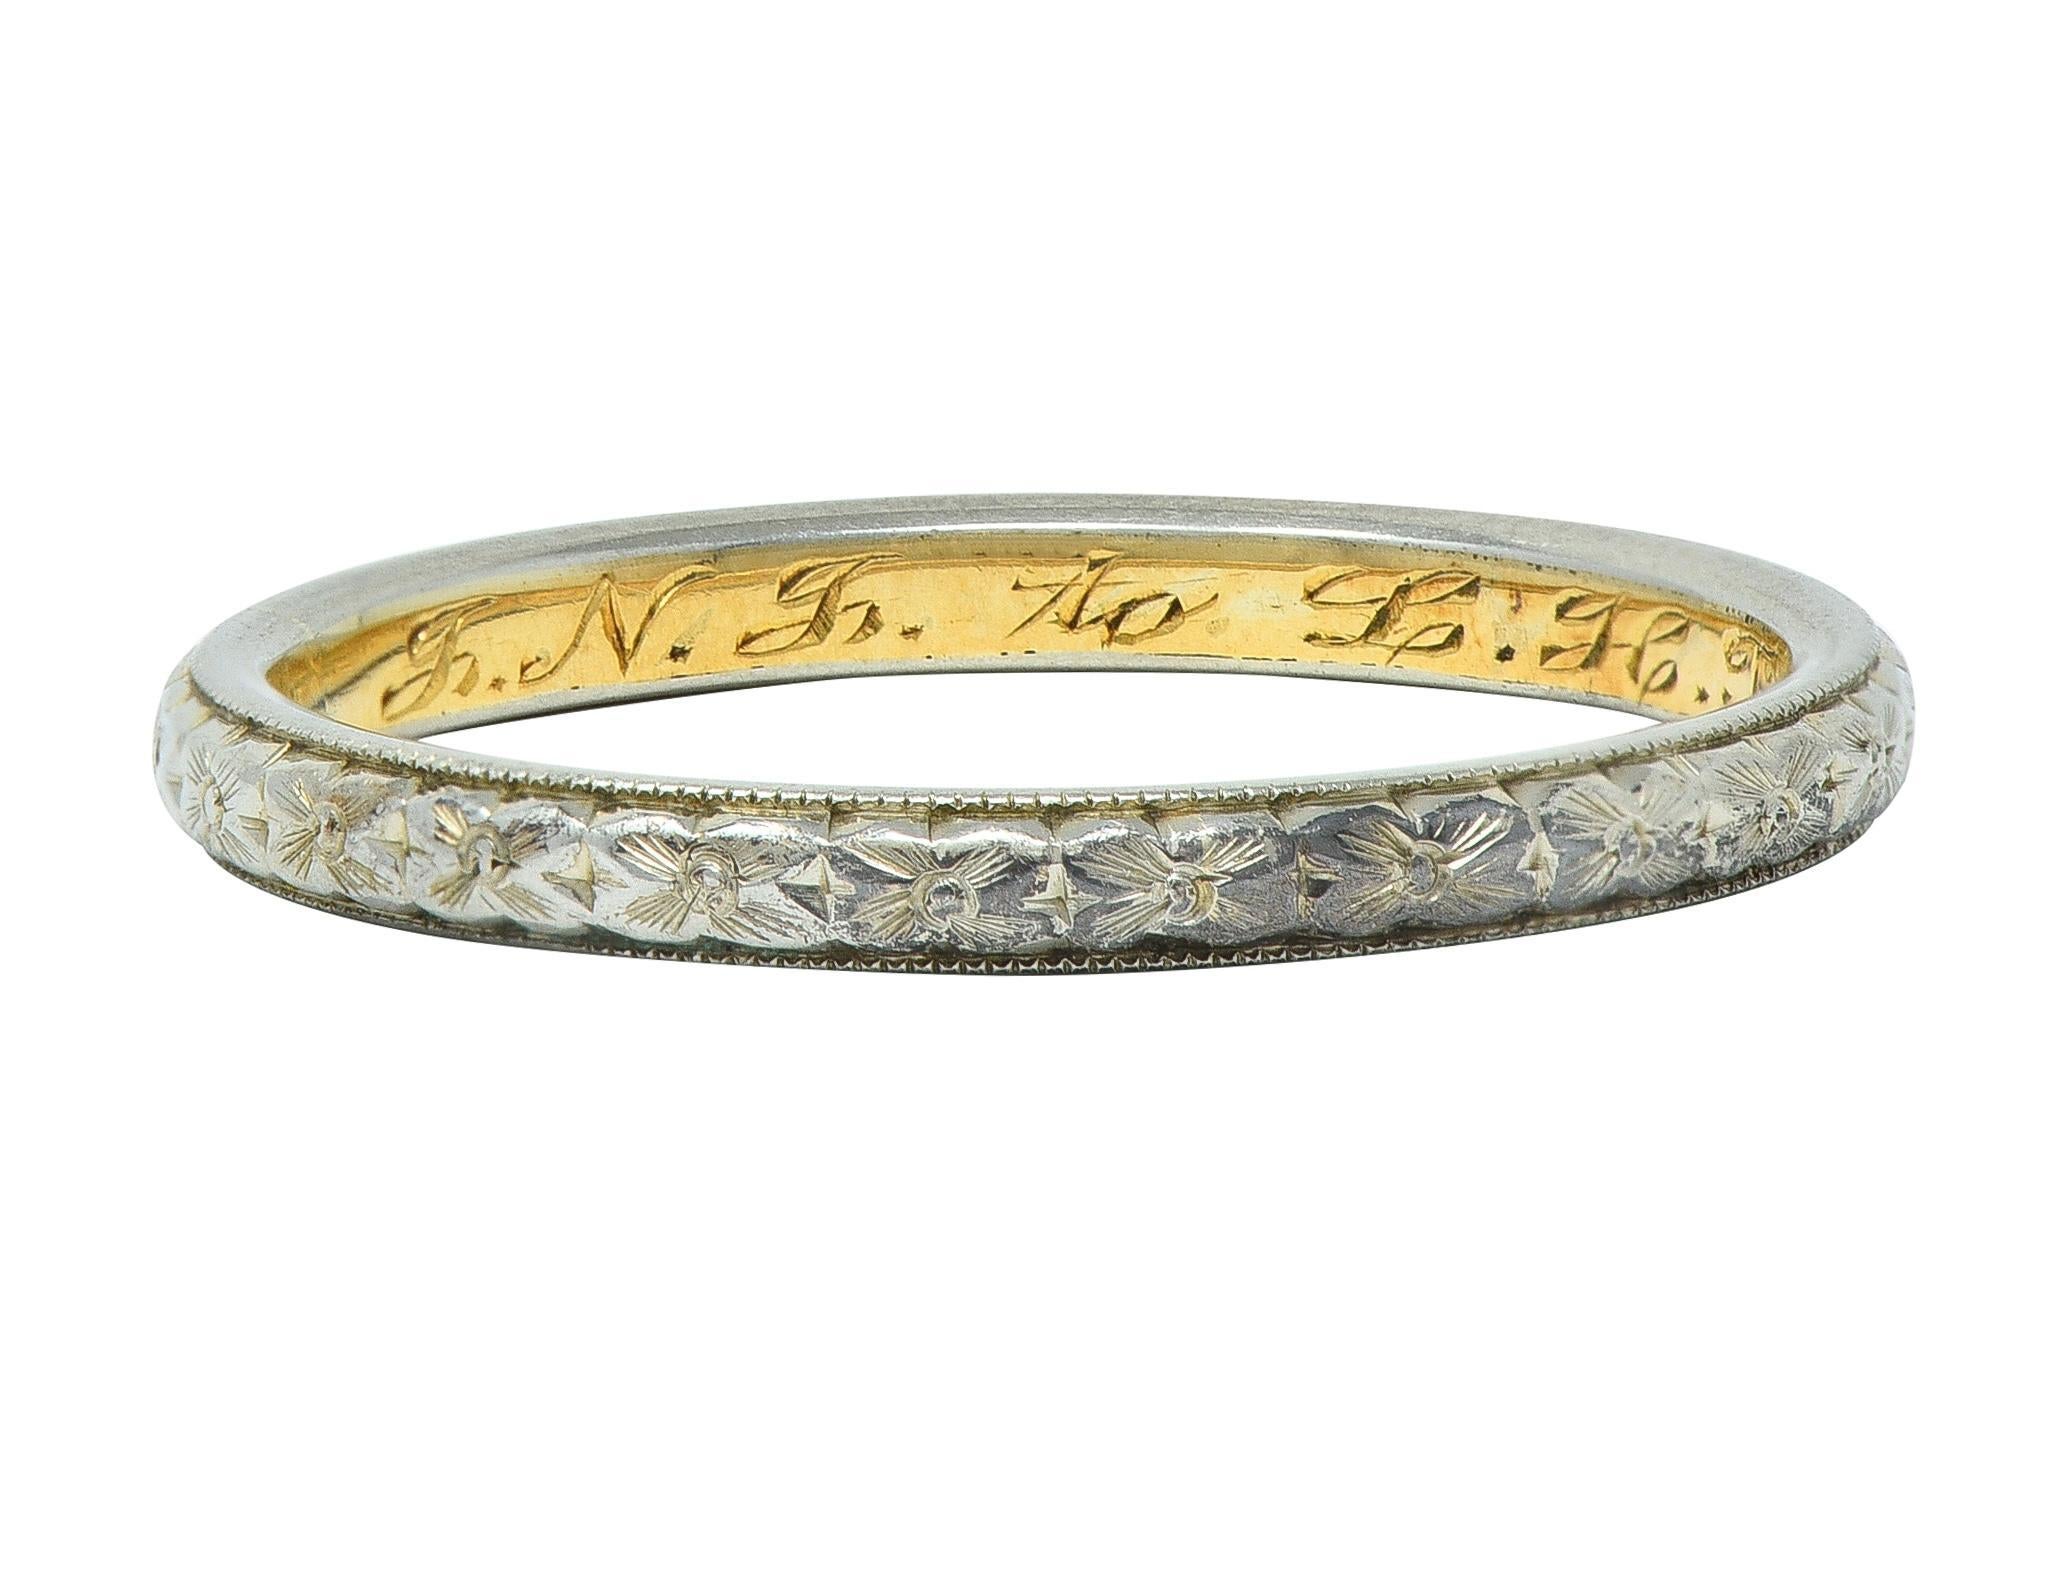 Band ring features an engraved white gold orange blossom motif fully around 
Accented by milgrain edges - with yellow gold inner shank
Inscribed 'J. N. J. to L. H. T. June 22 1911' 
Tested as 18 karat gold
Circa: 1911; via dated inscription
Ring